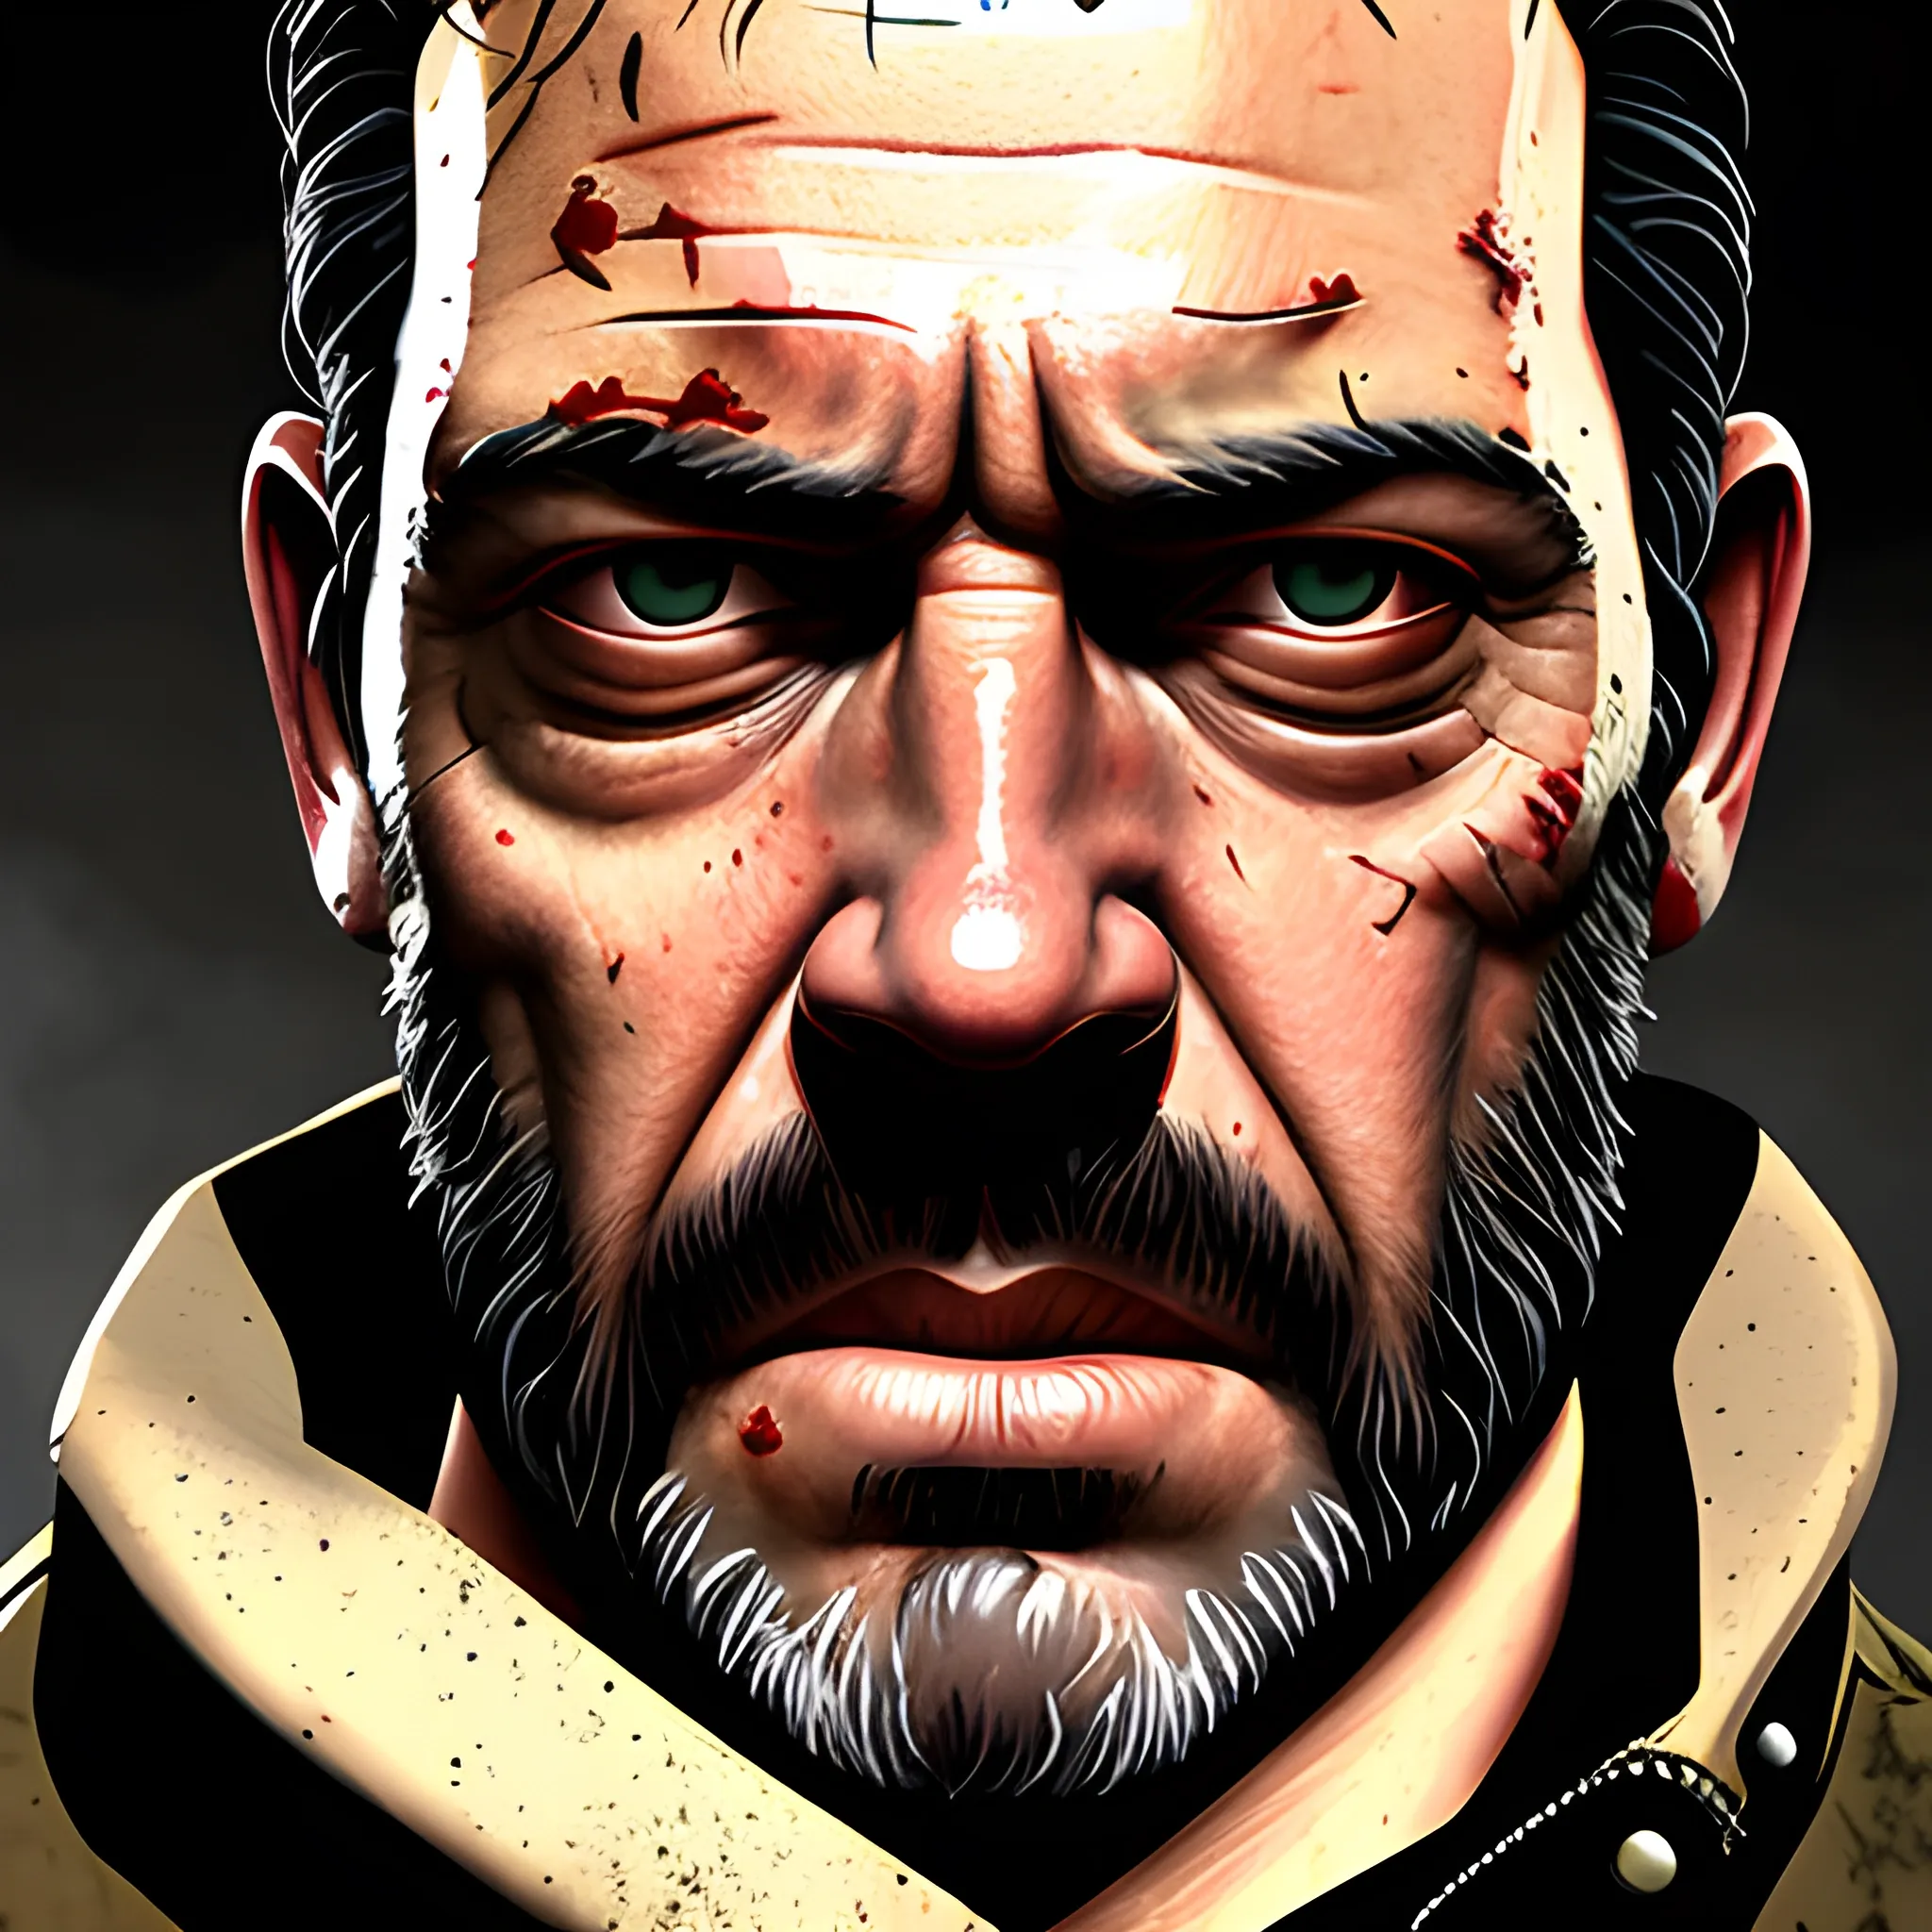 In the style of fallout 1, (masterpiece), (portrait photography), (portrait of Negan from The Walking Dead)